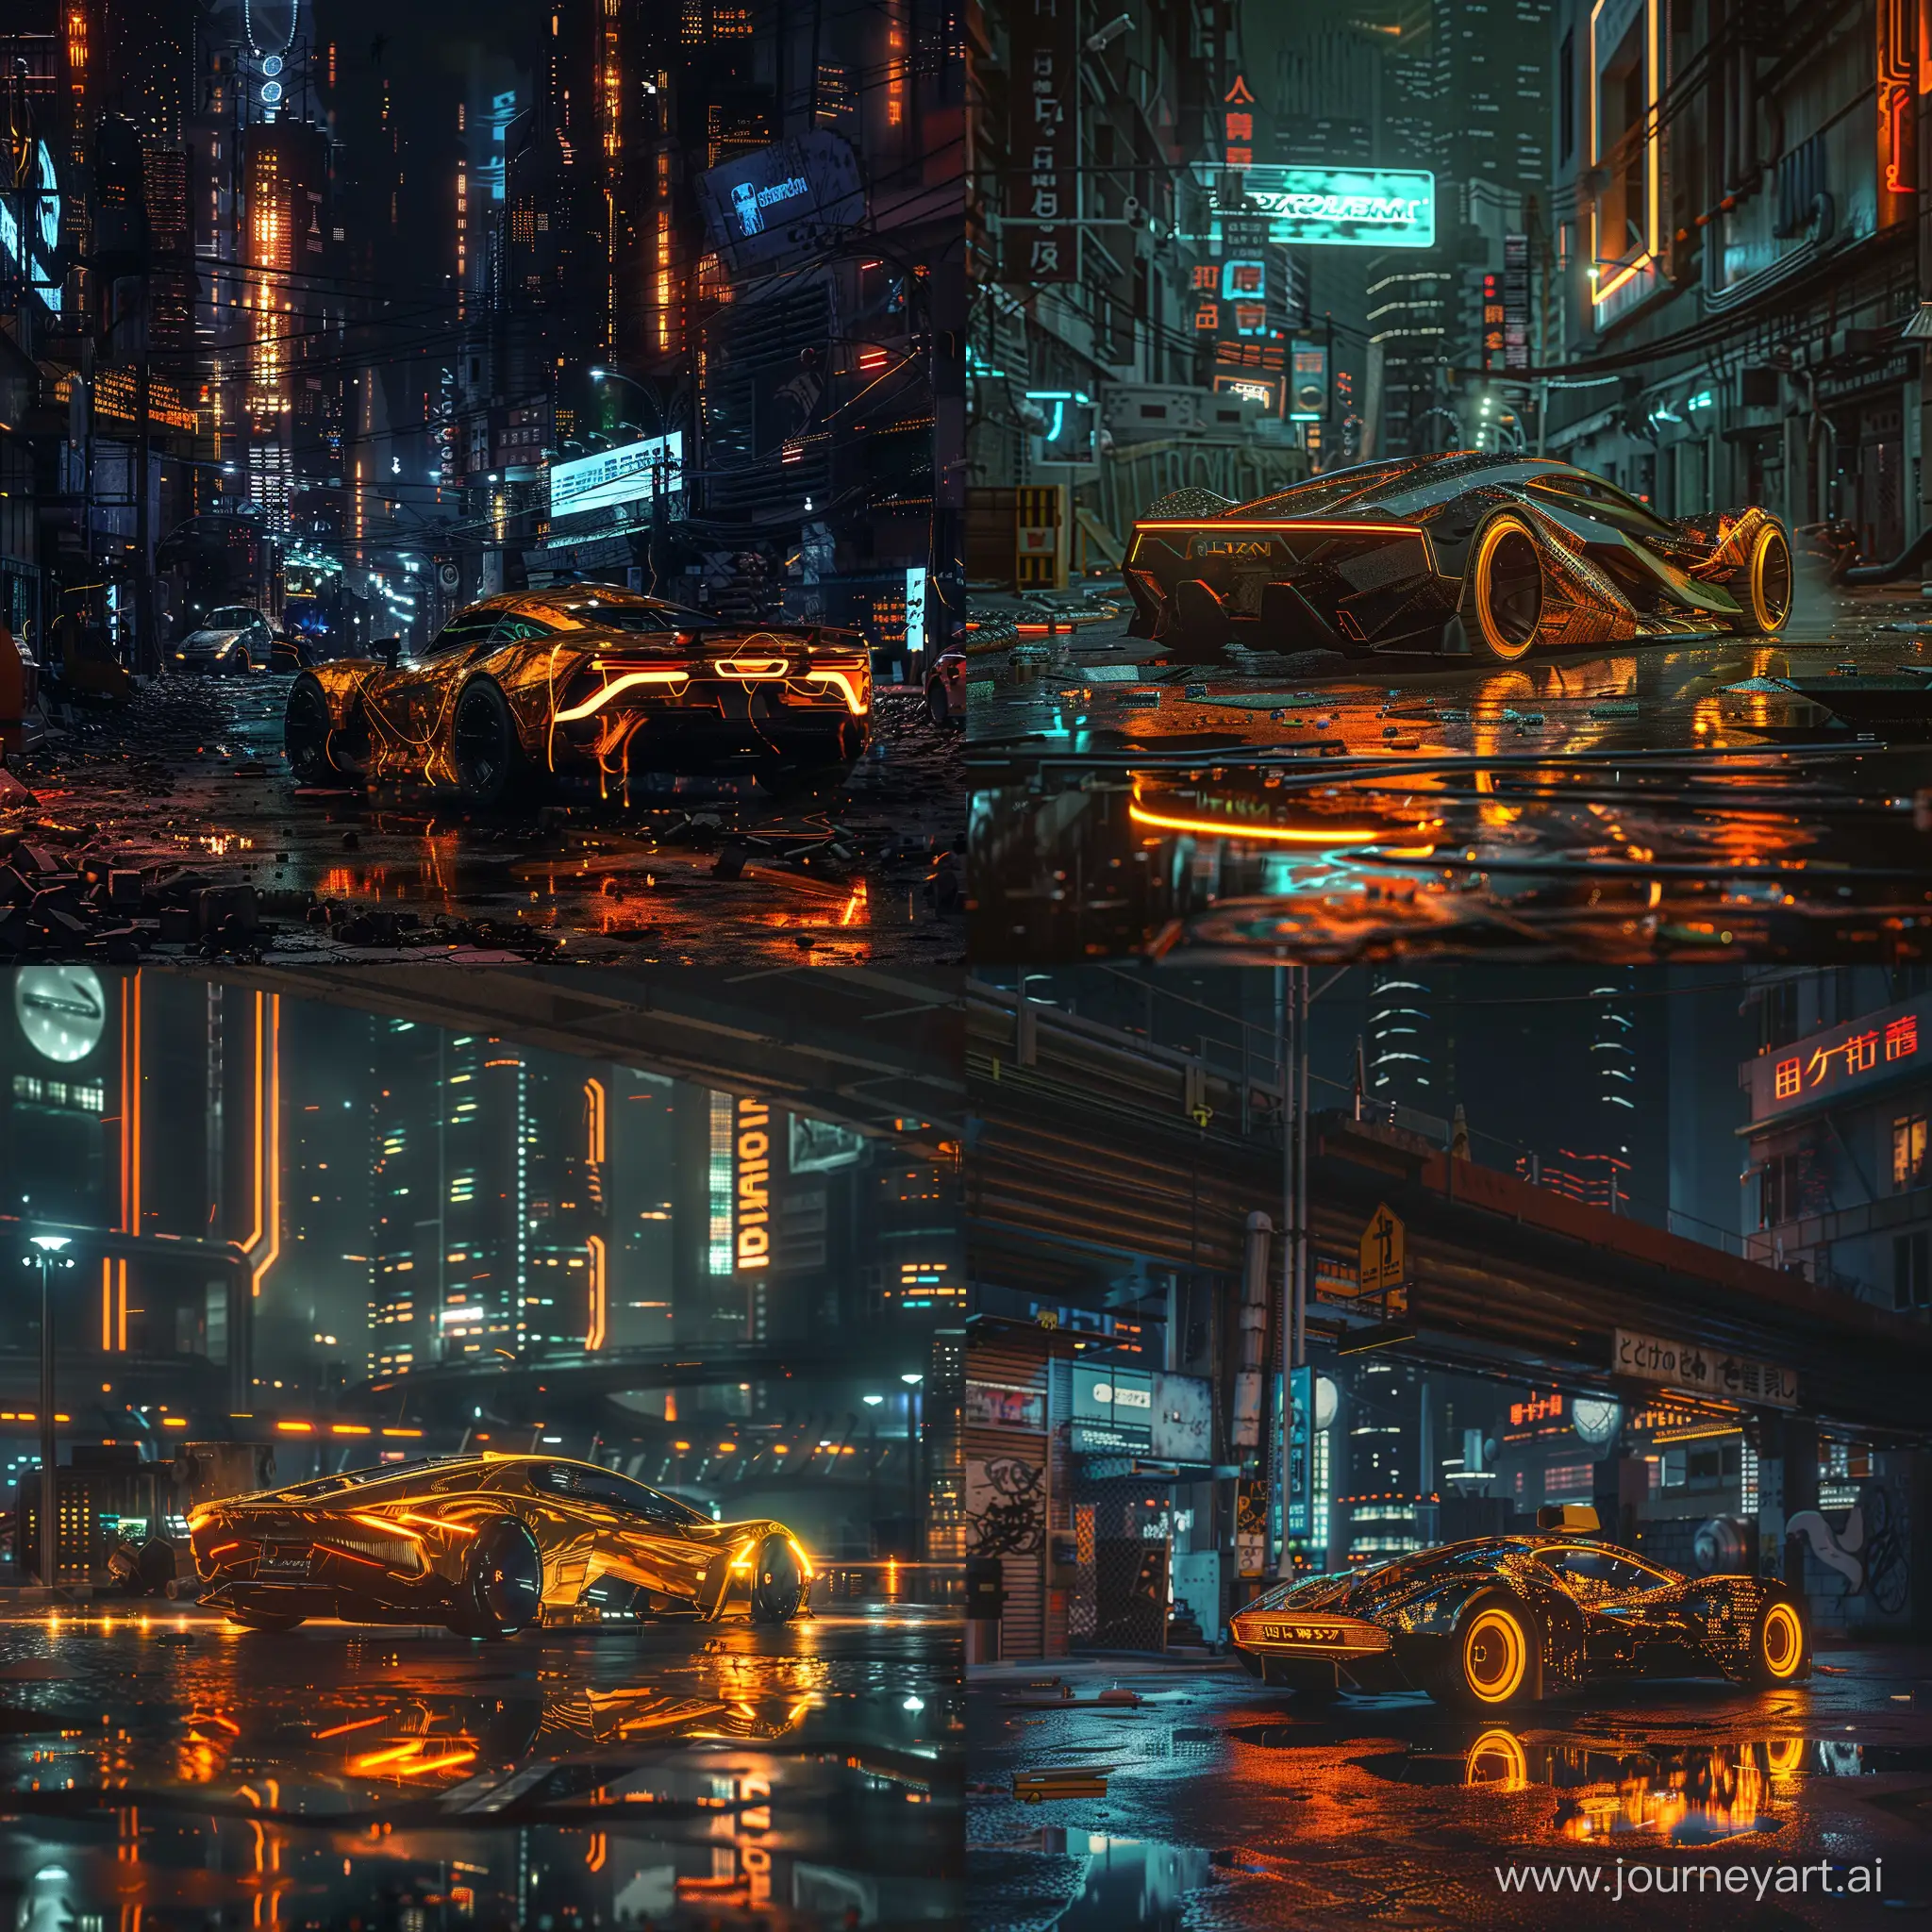 an abandoned but clean futuristic sci-fi city nighttime setting, 1 futuristic car on the scene, cyberpunk style but with the orange and gold glowing color theme 